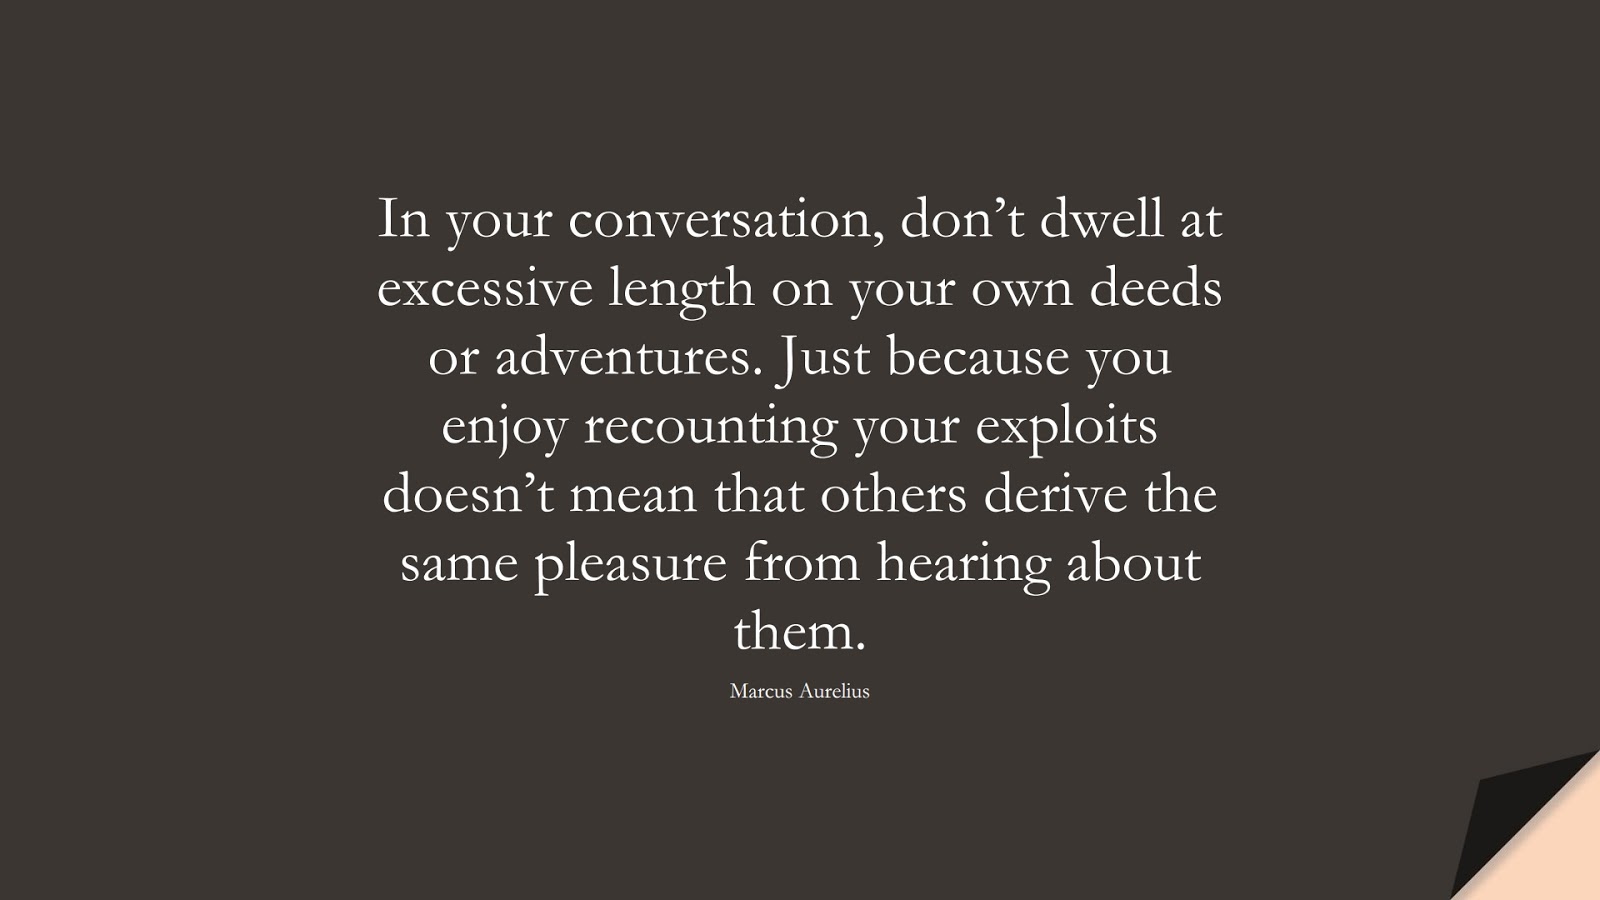 In your conversation, don’t dwell at excessive length on your own deeds or adventures. Just because you enjoy recounting your exploits doesn’t mean that others derive the same pleasure from hearing about them. (Marcus Aurelius);  #MarcusAureliusQuotes